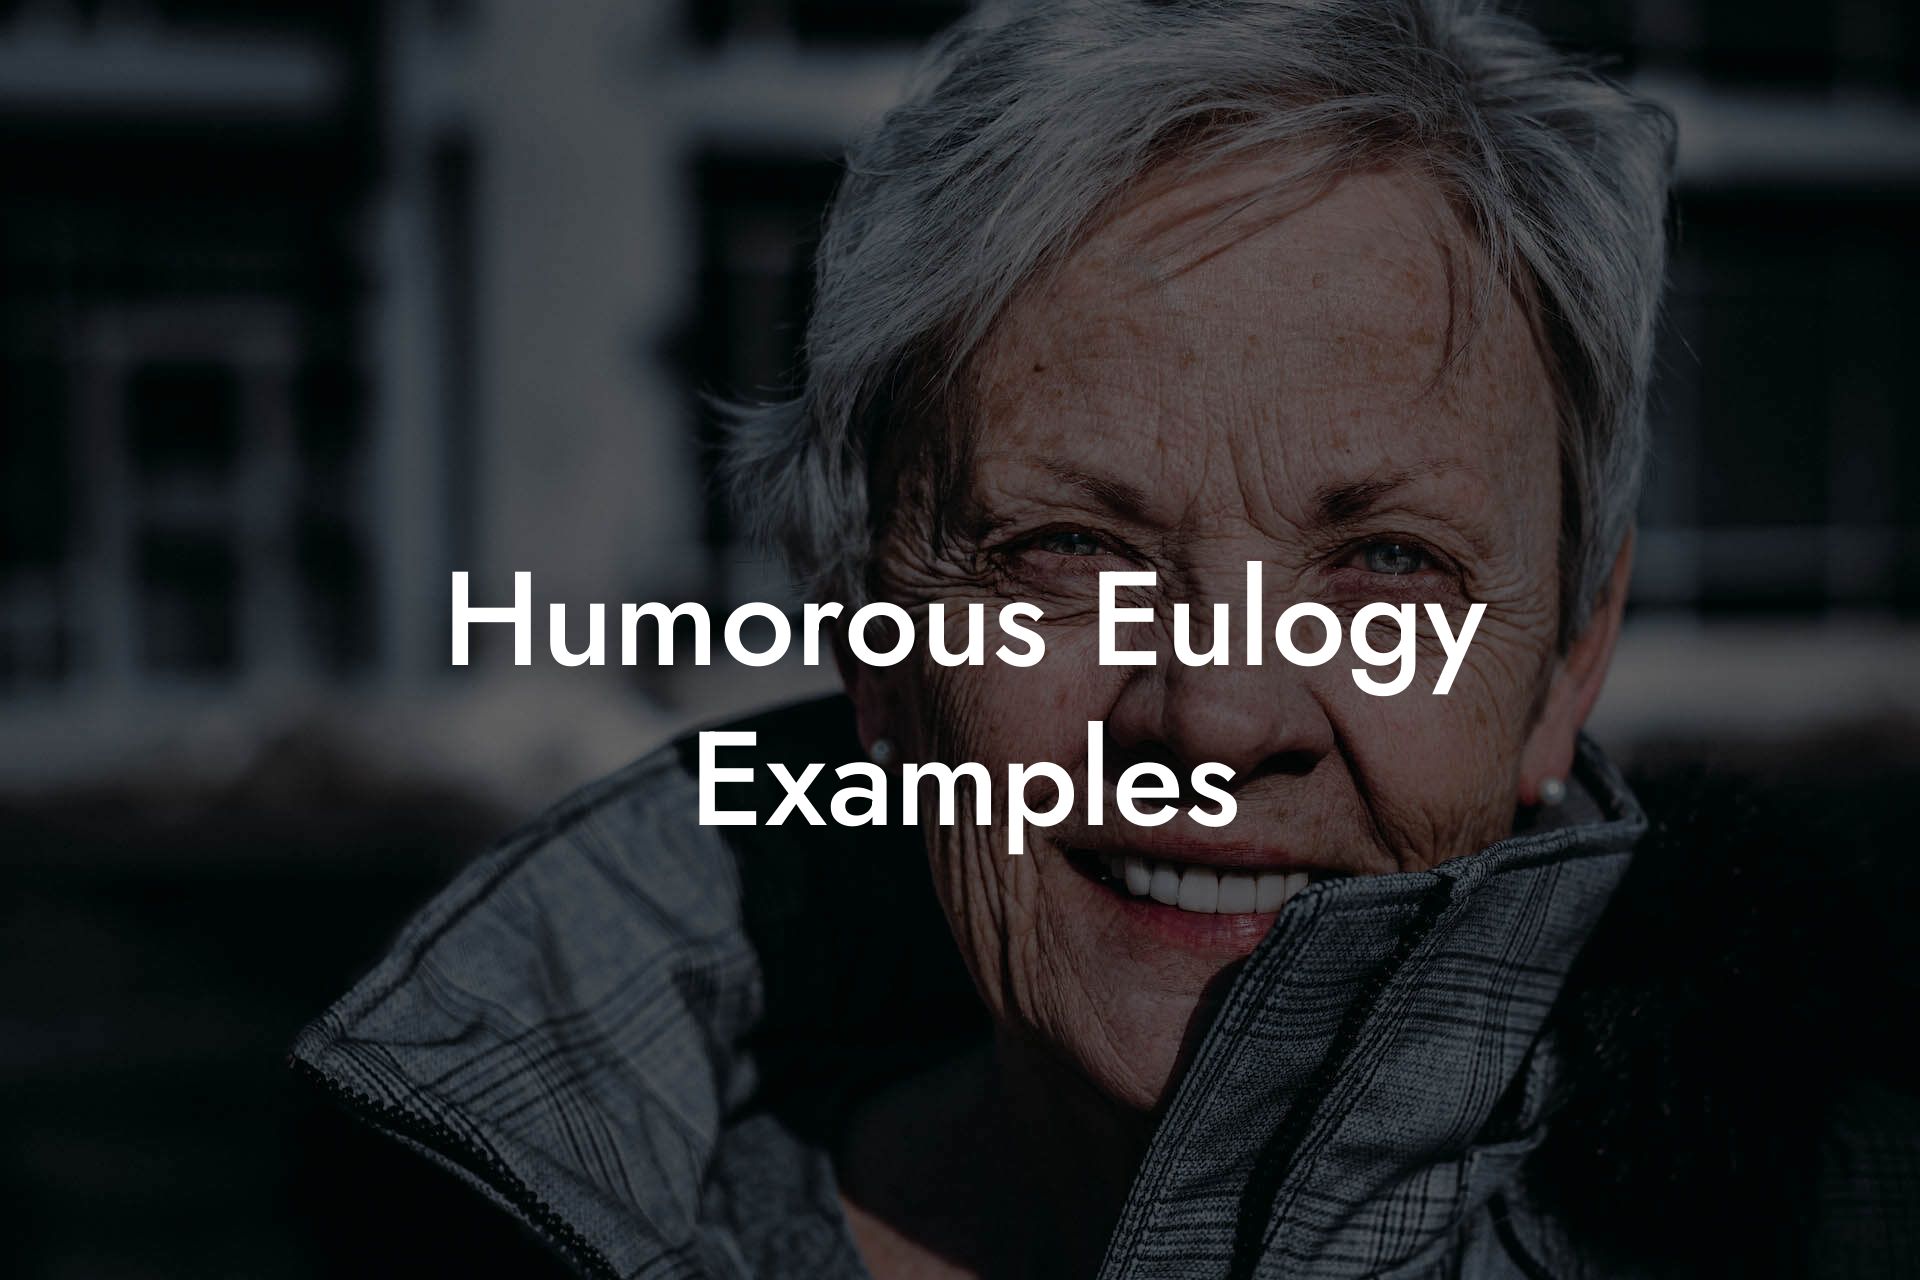 Humorous Eulogy Examples